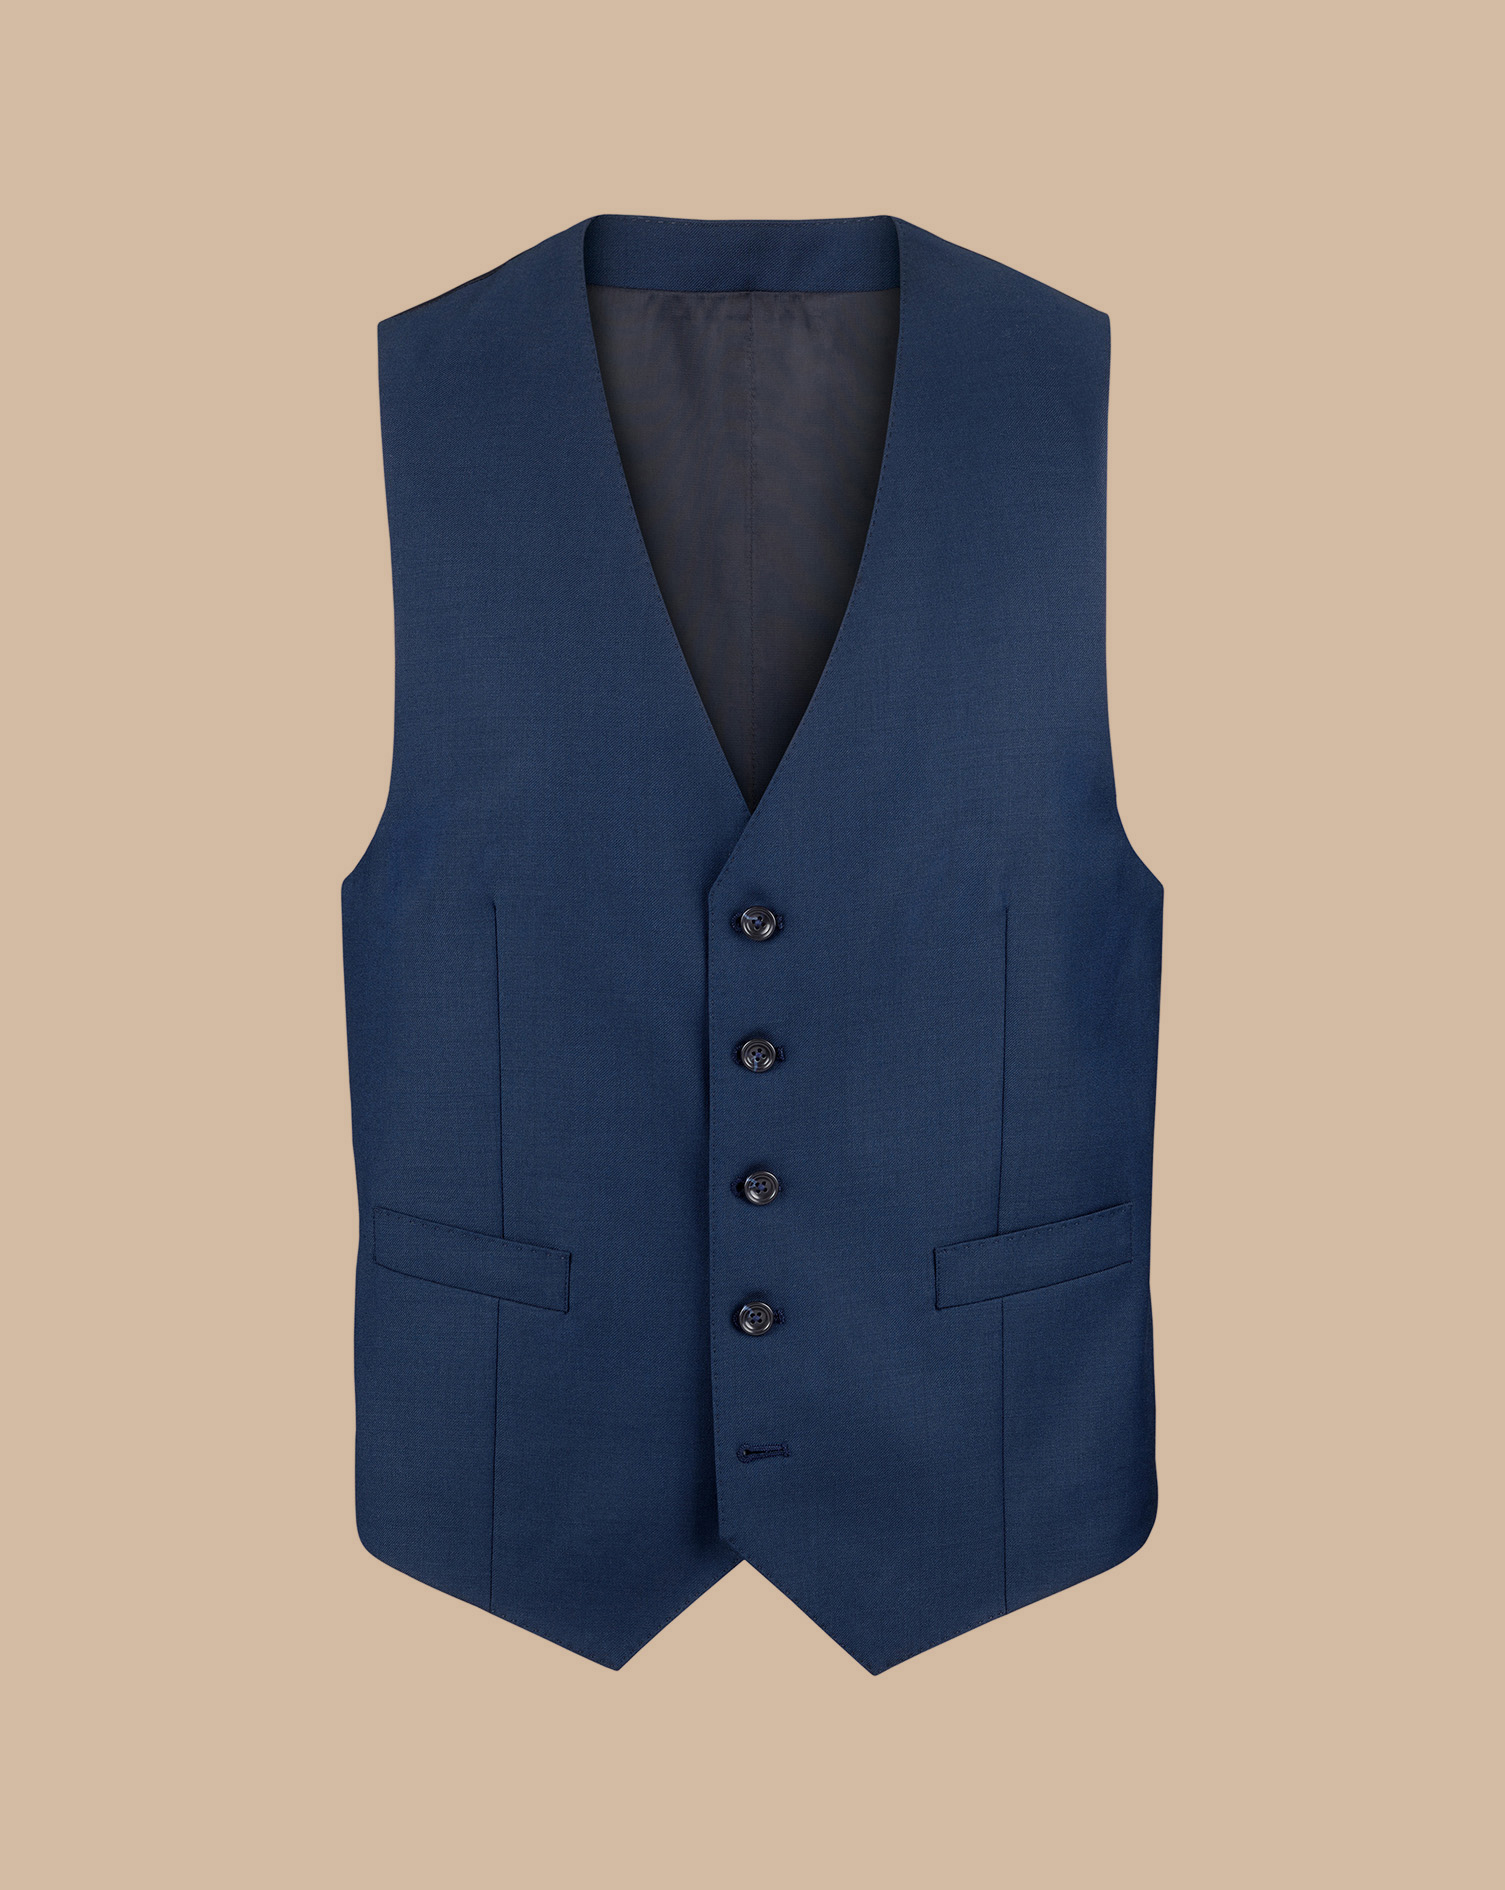 Men's Charles Tyrwhitt Natural Stretch Twill Suit Waistcoat - Royal Blue Size w44 Wool
